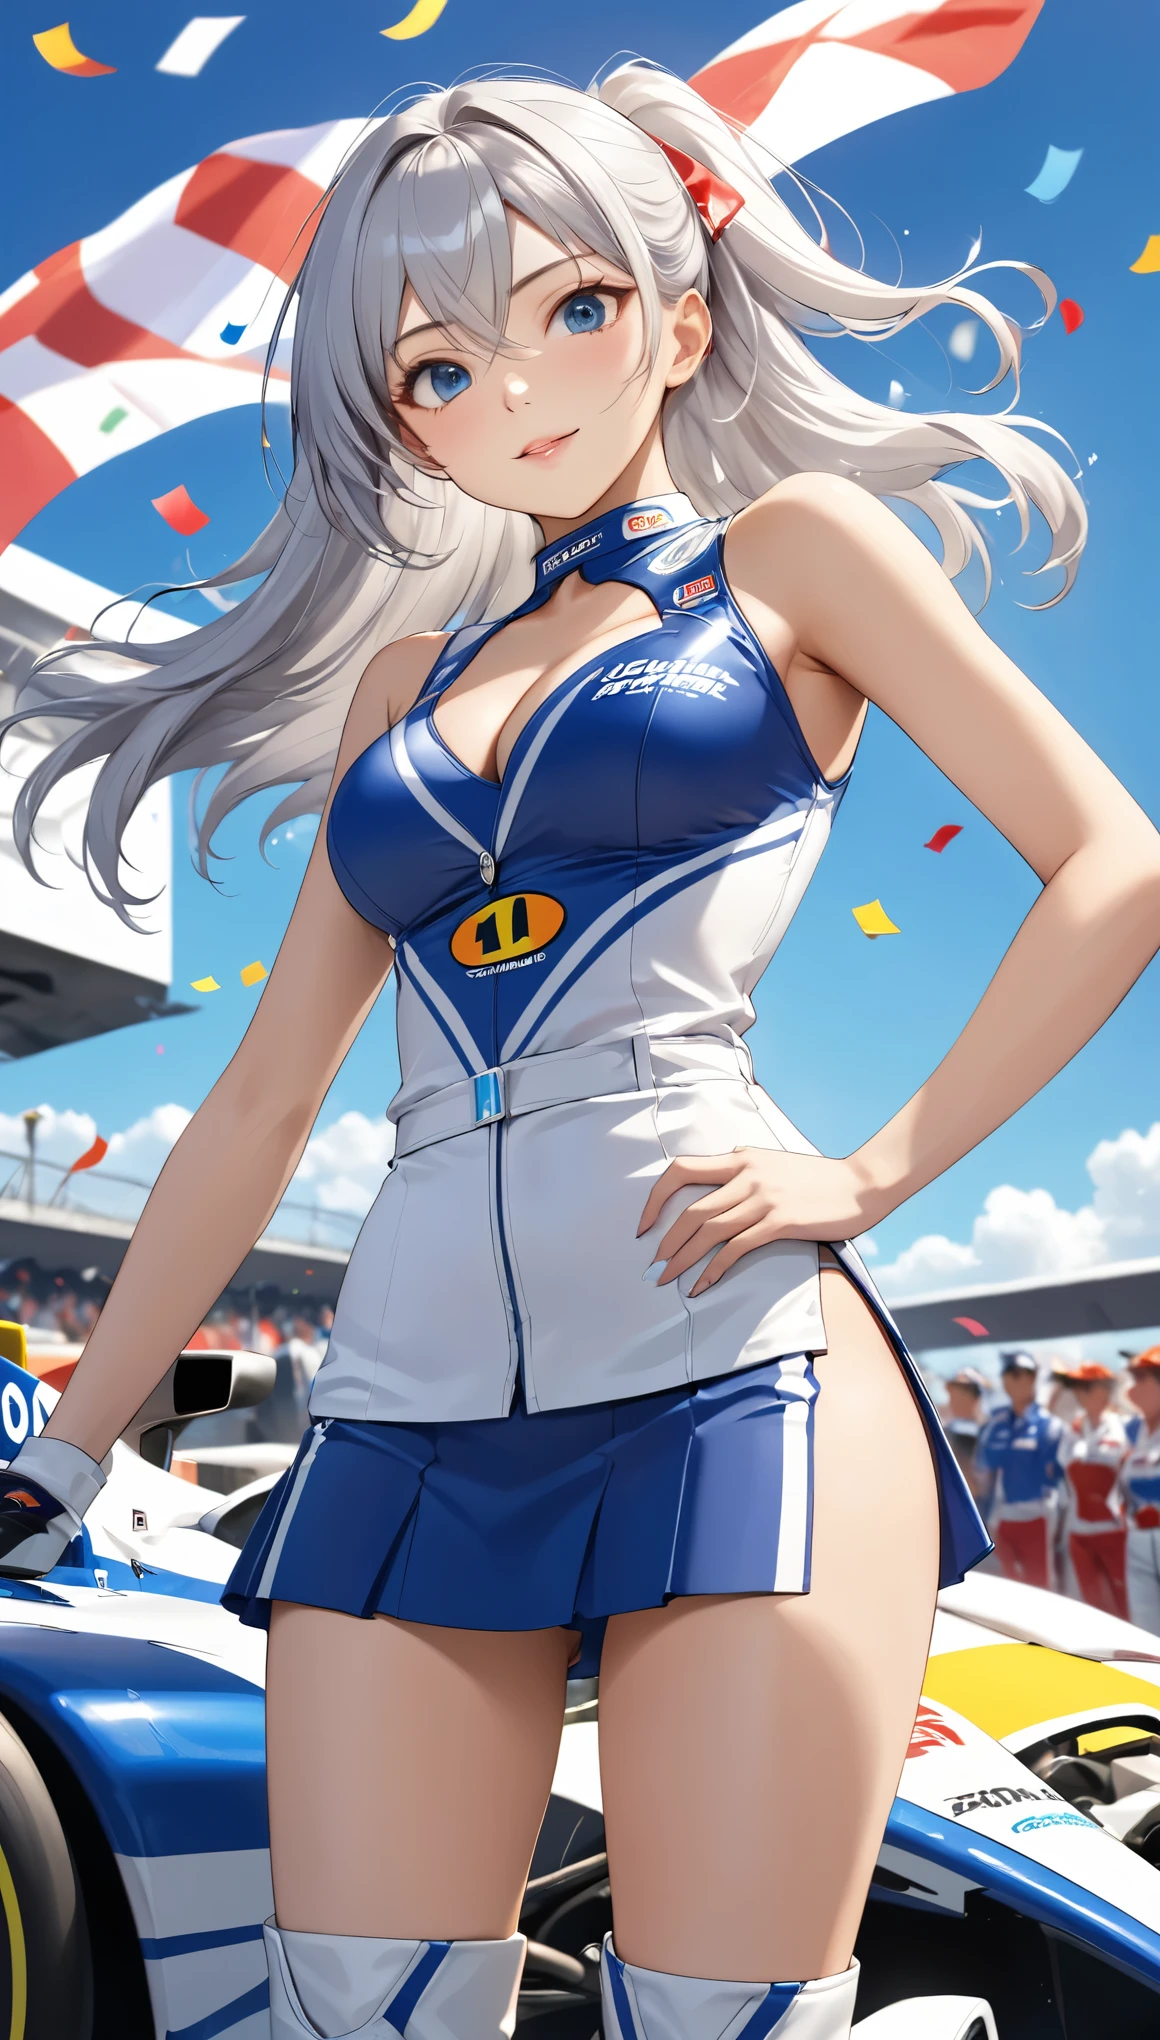 Highest quality, Super quality, 16K, Incredibly absurd, Very detailed, 2.5D, delicate and dynamic, blue sky, Confetti, Racing Car, flag, Small face, Extremely delicate facial expression, Delicate eye depiction, Extremely detailed hair, Upper body close-up, sole sexy lady, healthy shaped body, 22 years old lady, Race Queen, 170cm tall, big firm bouncing busts, white silver long hair, sexy long legs, Flashy Race Queen costume, blue tight skirt, white leather long boots, Formula 1, Auto Racing Track